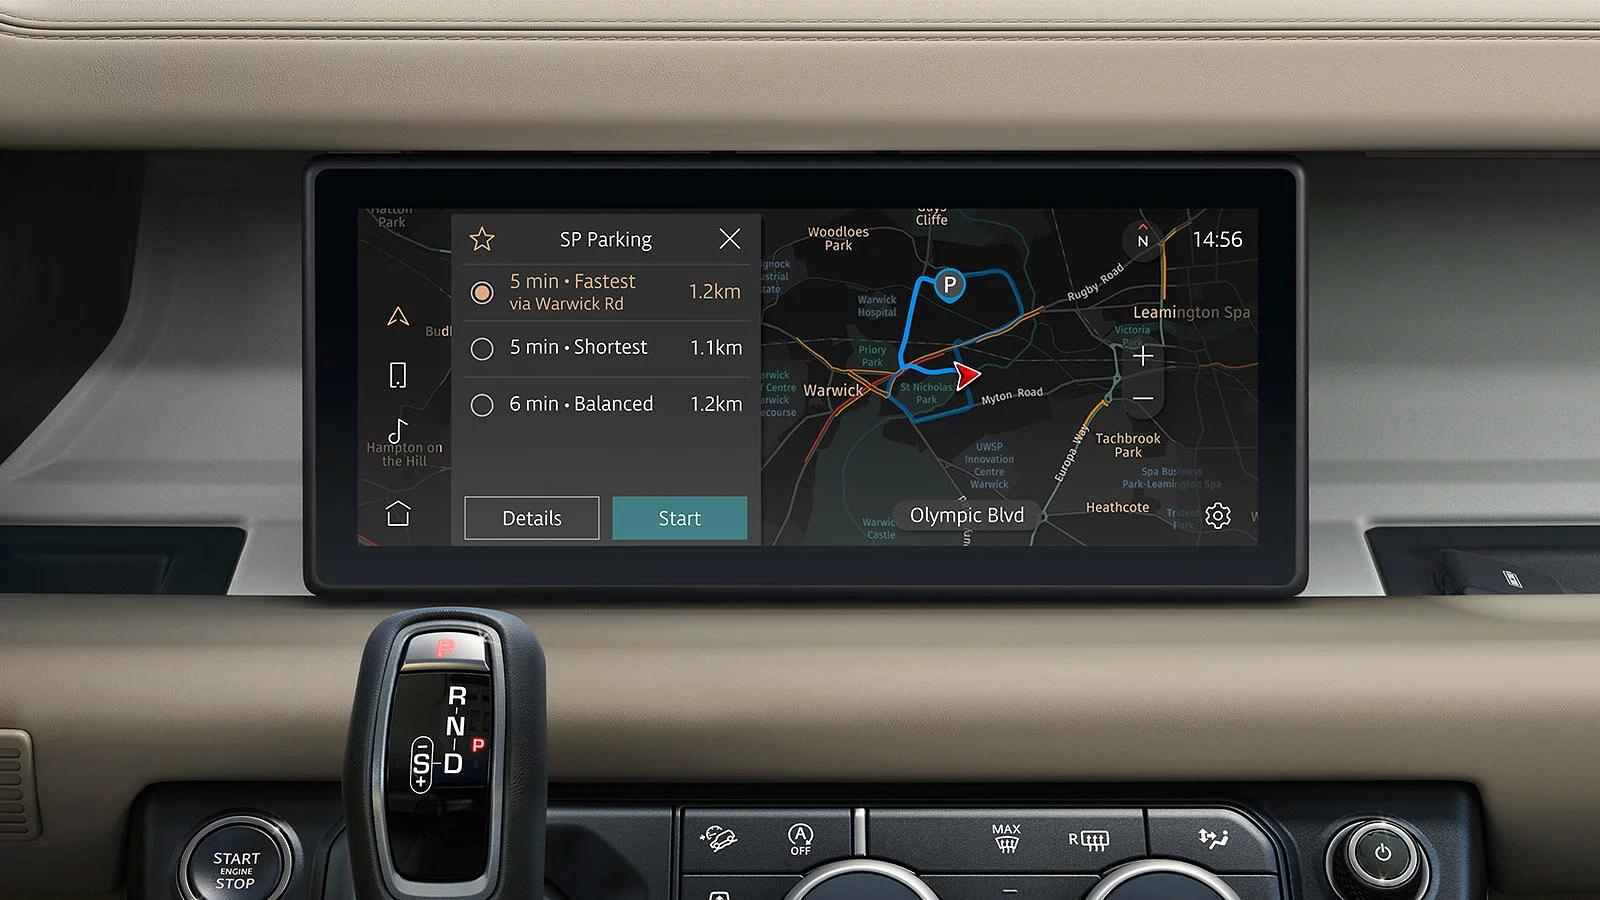 FIND CHARGERS USING YOUR IN-CAR NAVIGATION